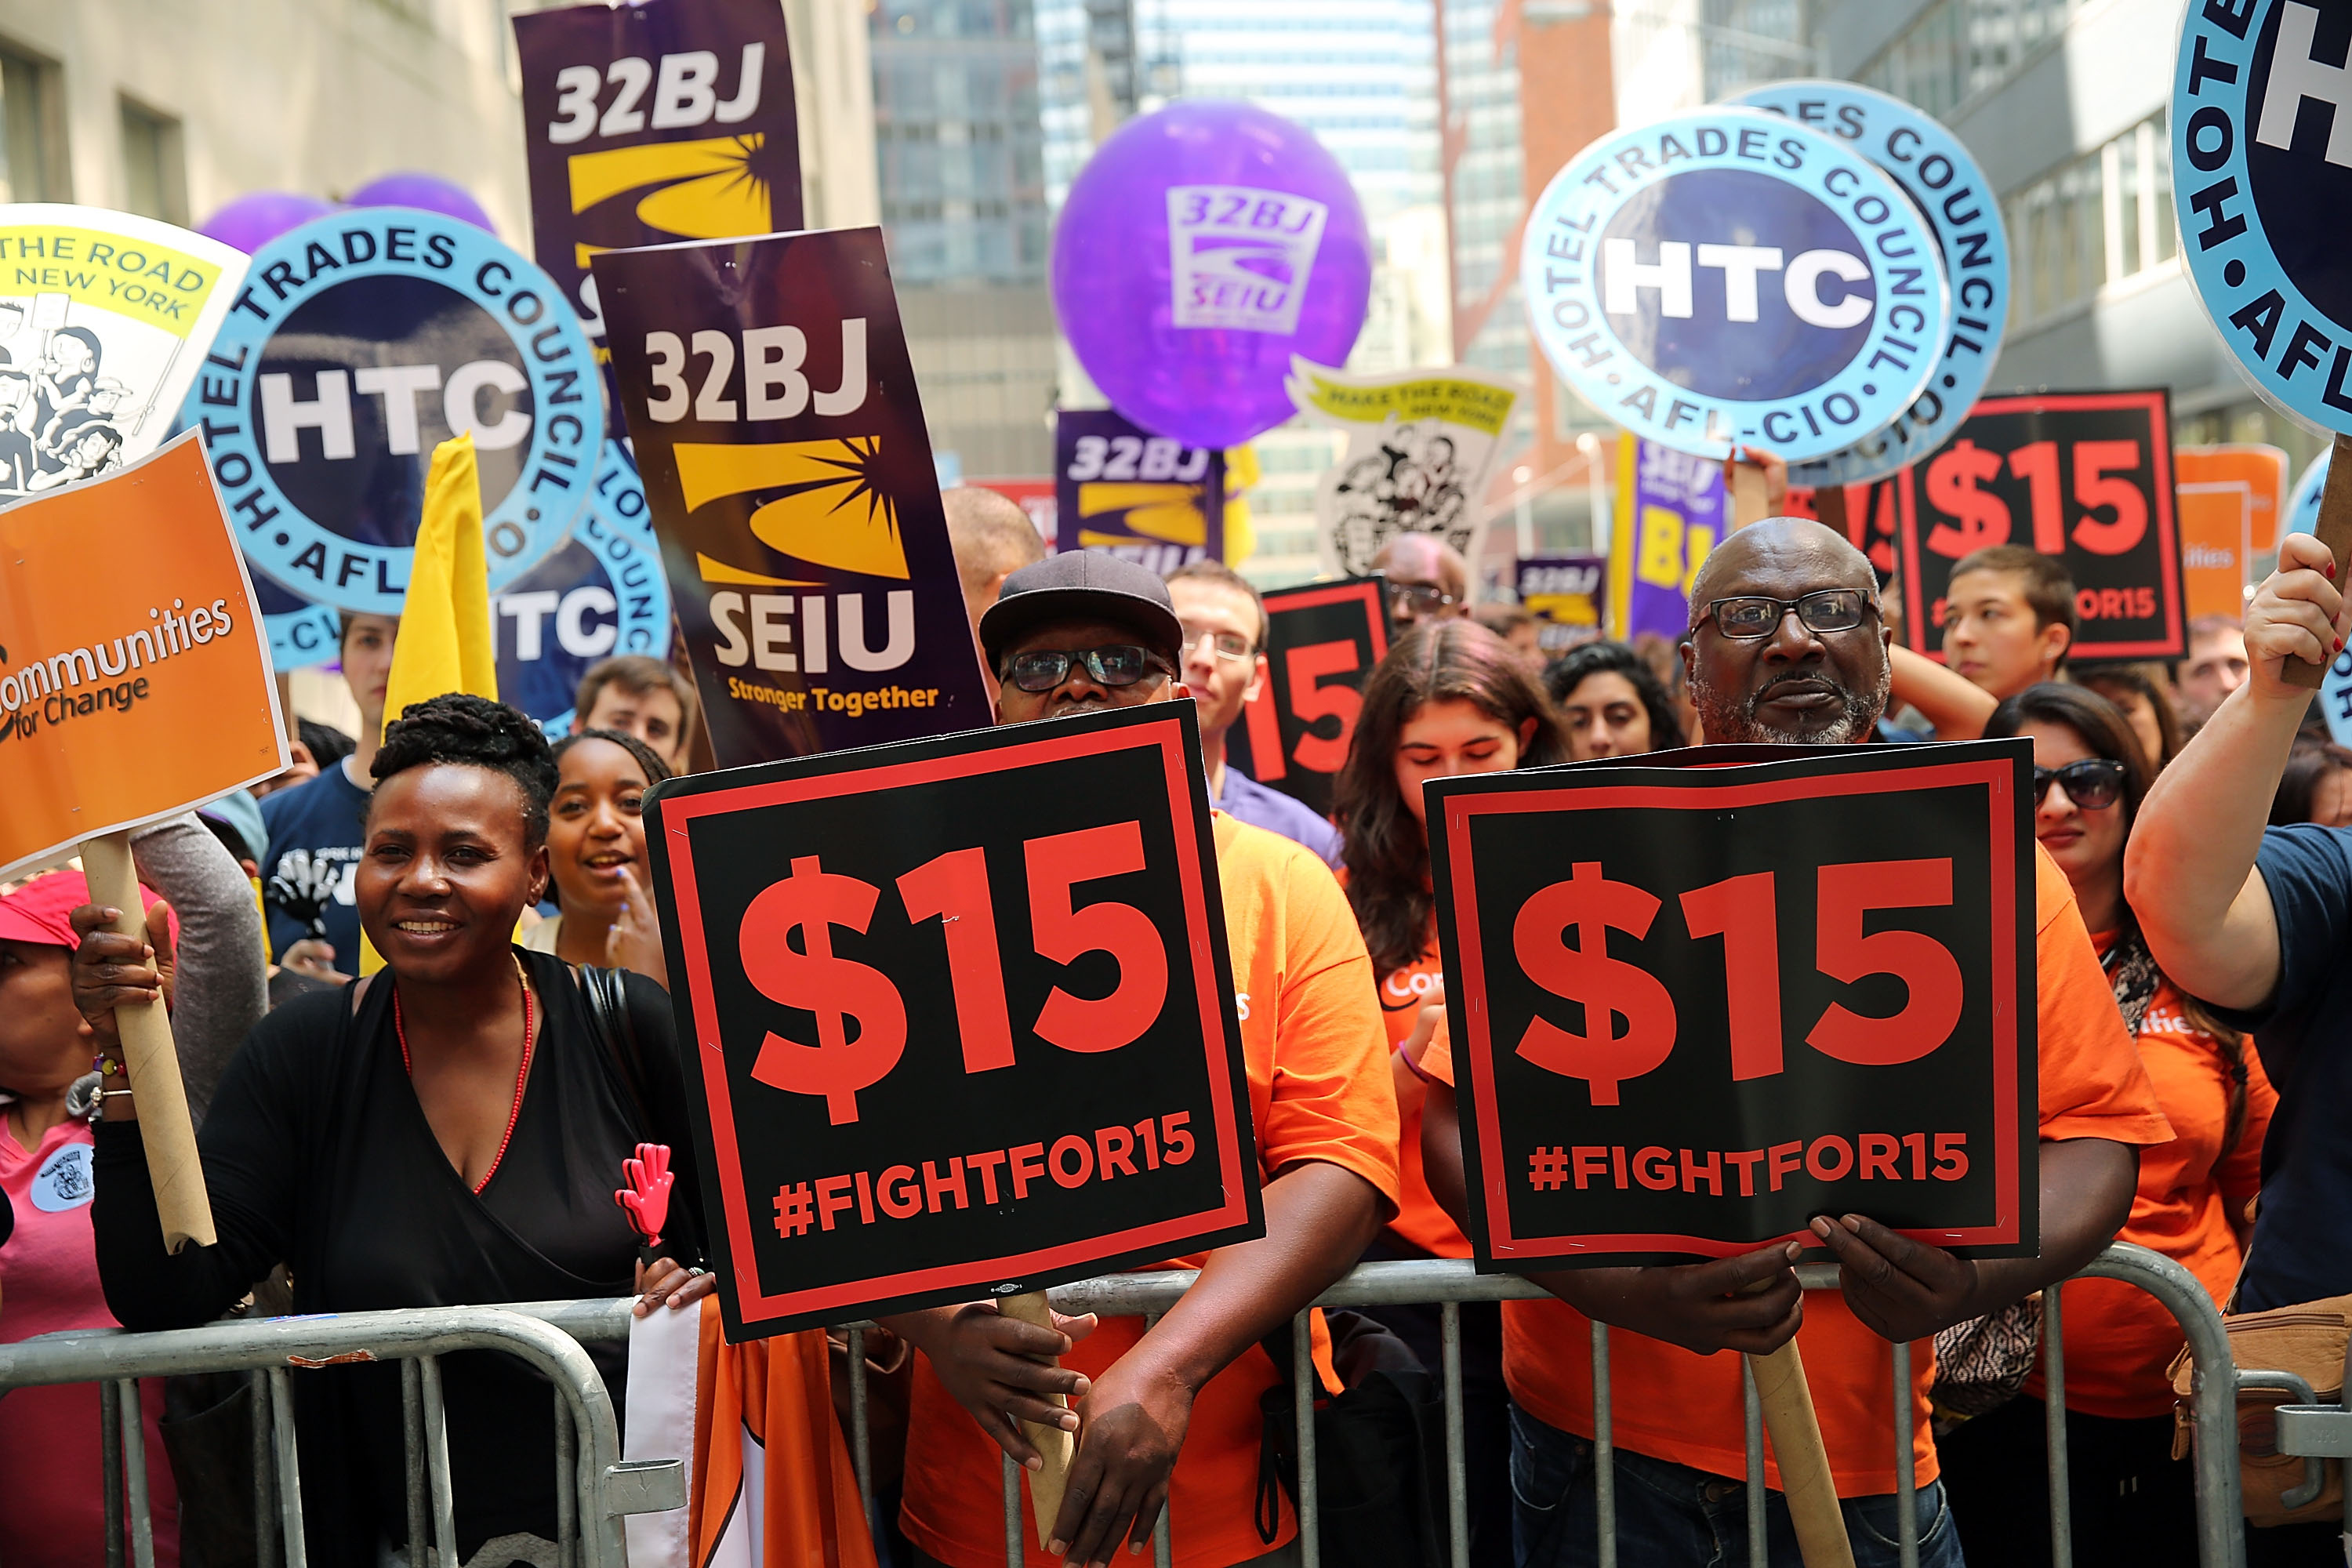 Labor leaders, workers and activists attend  a rally for a $15 minimum hourly wage on July 22, 2015 in New York City. (Spencer Platt—Getty Images)